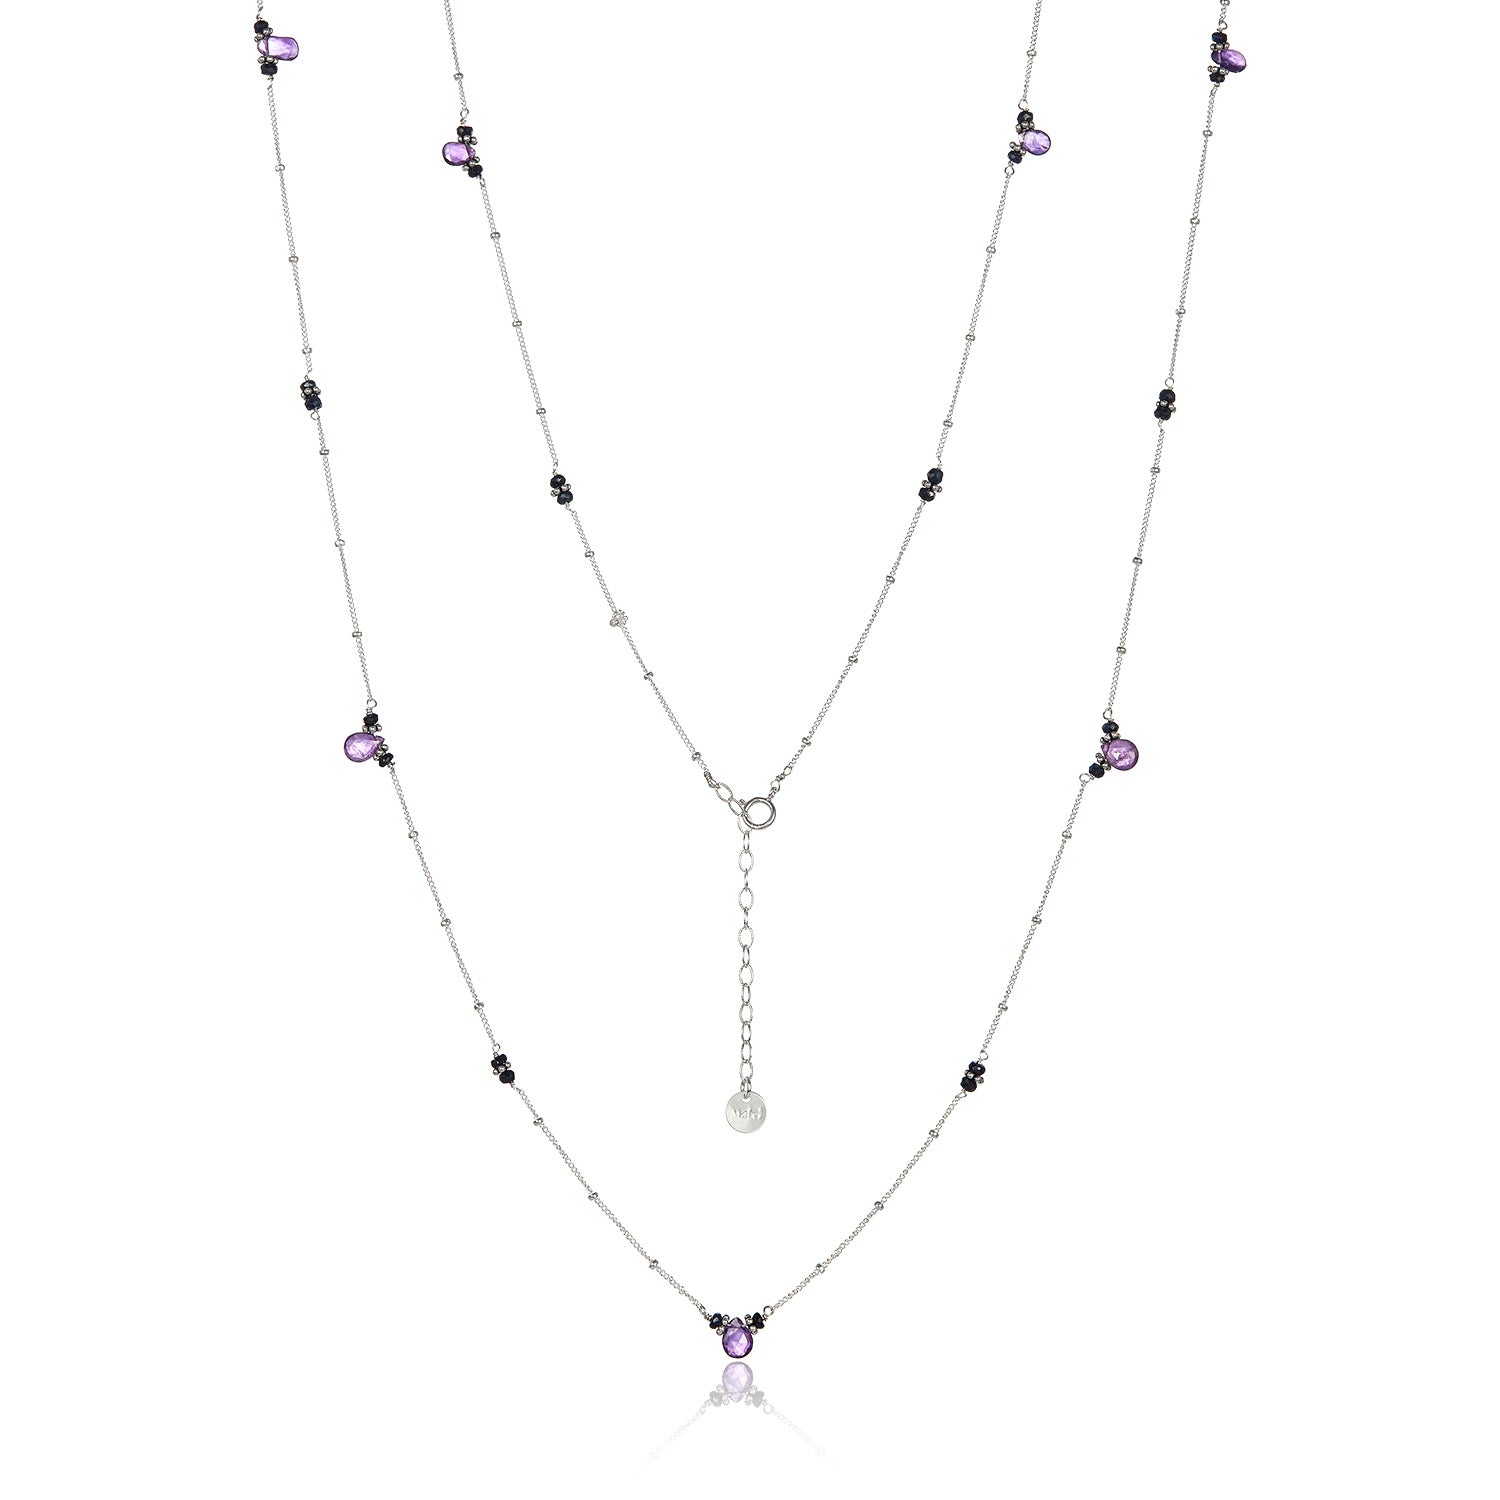 Flapper Chic Necklace - Amethyst